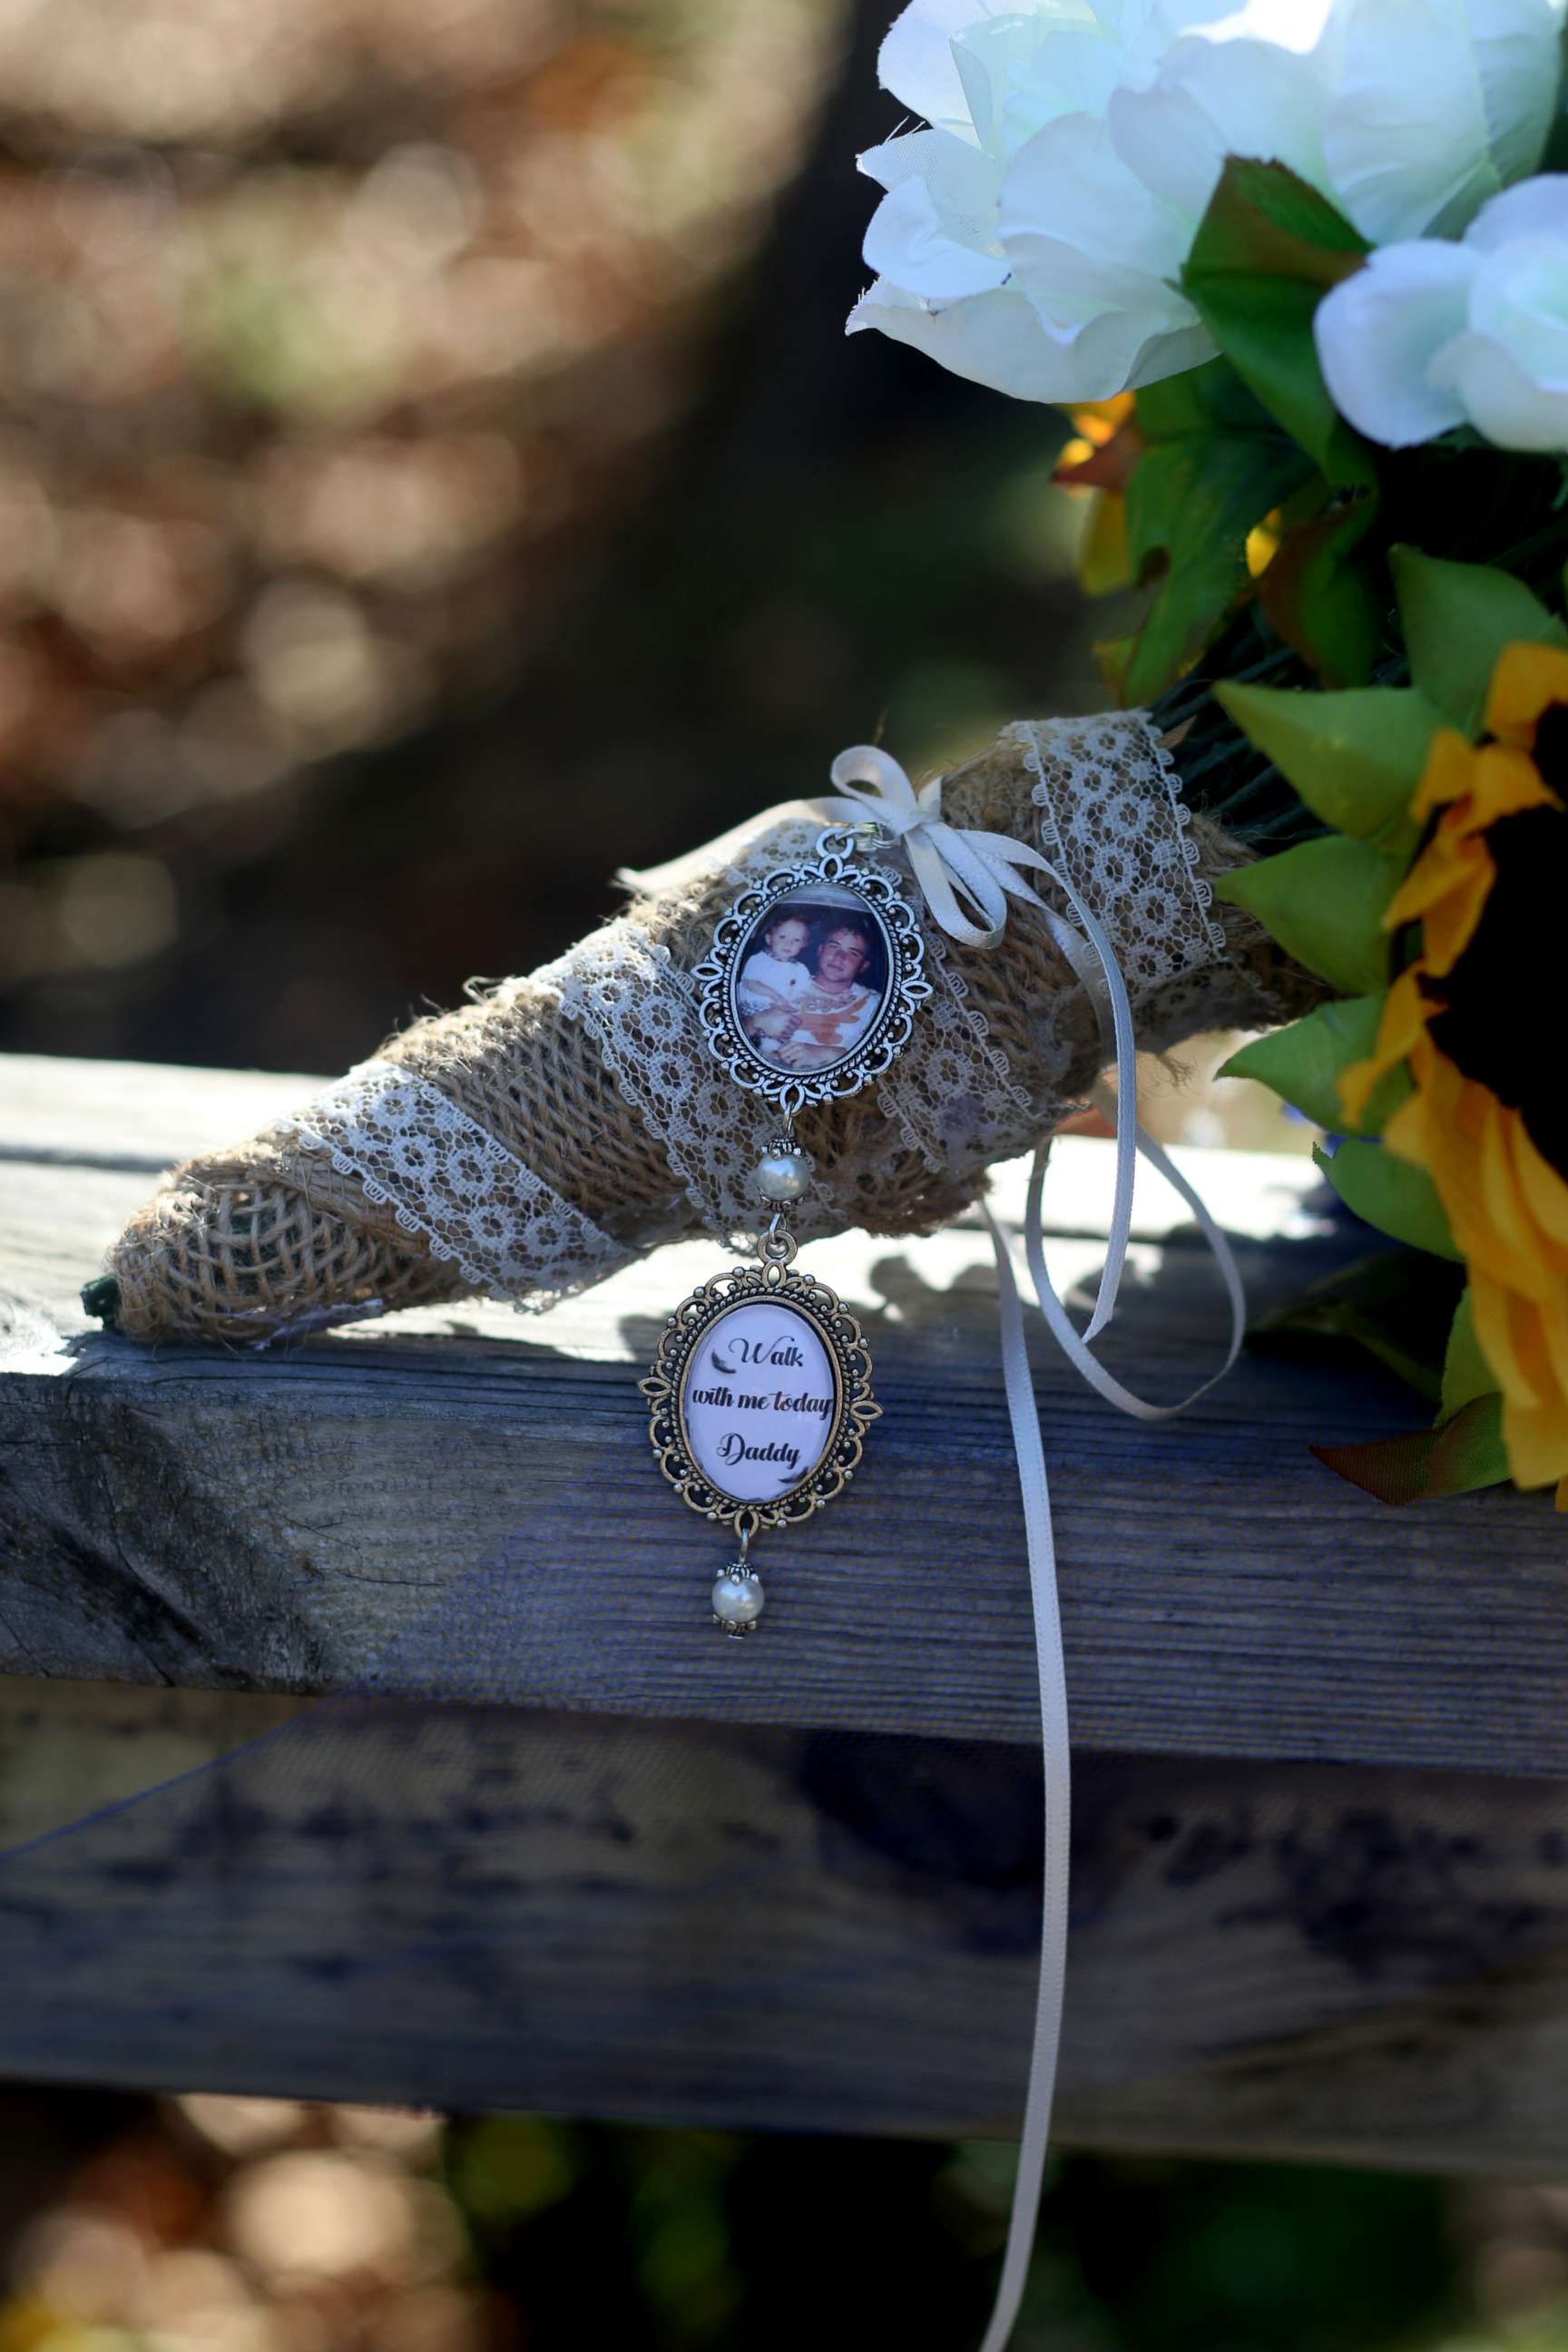 PHOTO: Mikayla Wroten's wedding bouquet included a photo of her late father with the words, "Walk with me today Daddy."